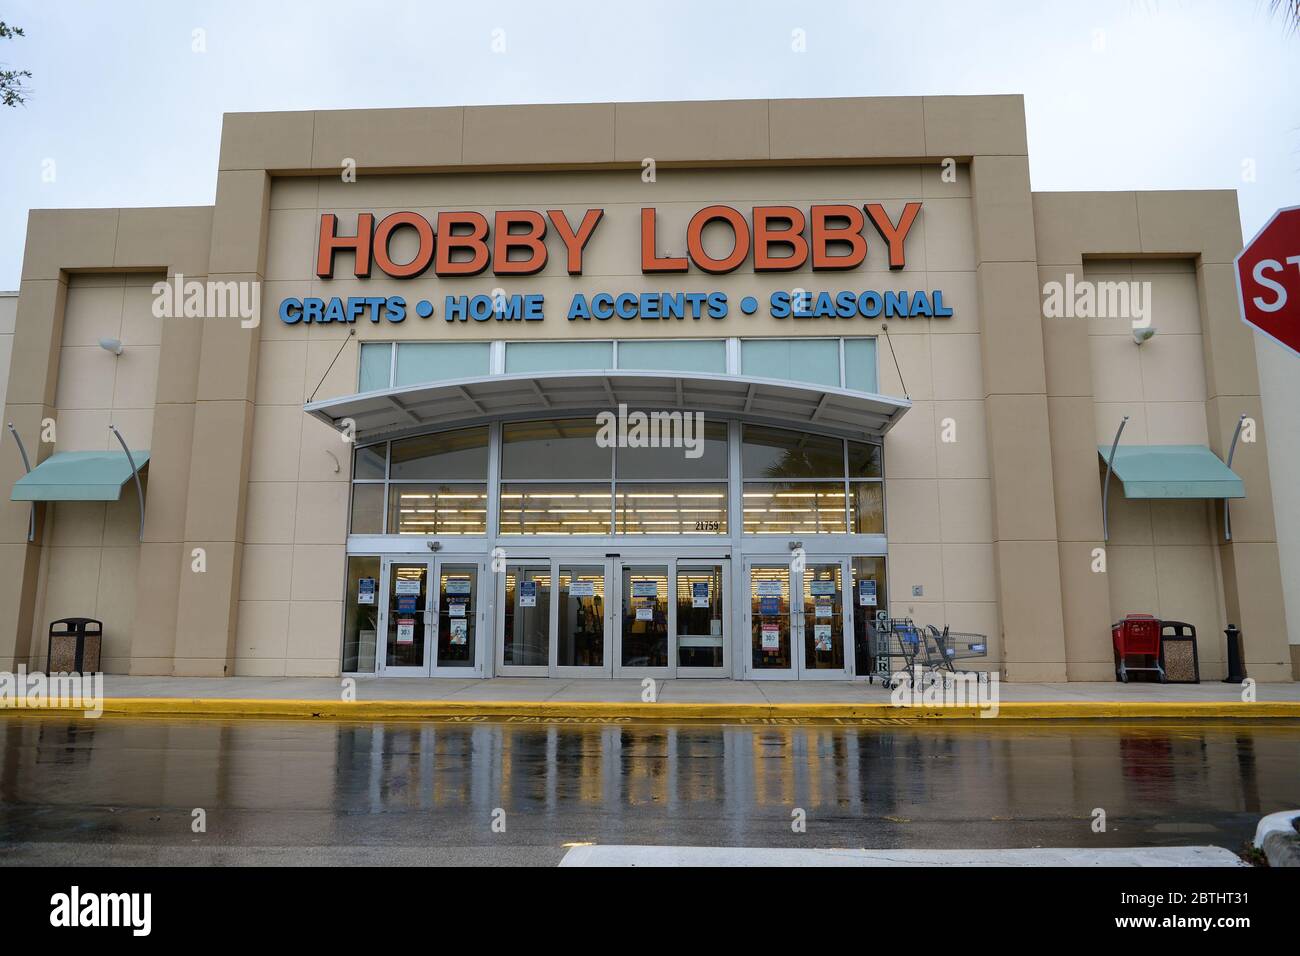 Boca Raton, FL, USA. 25th May, 2020. Hobby Lobby is closing all stores and  furloughing 'nearly all' employees after it defied stay-at-home orders by  quietly reopening locations around the nation during the